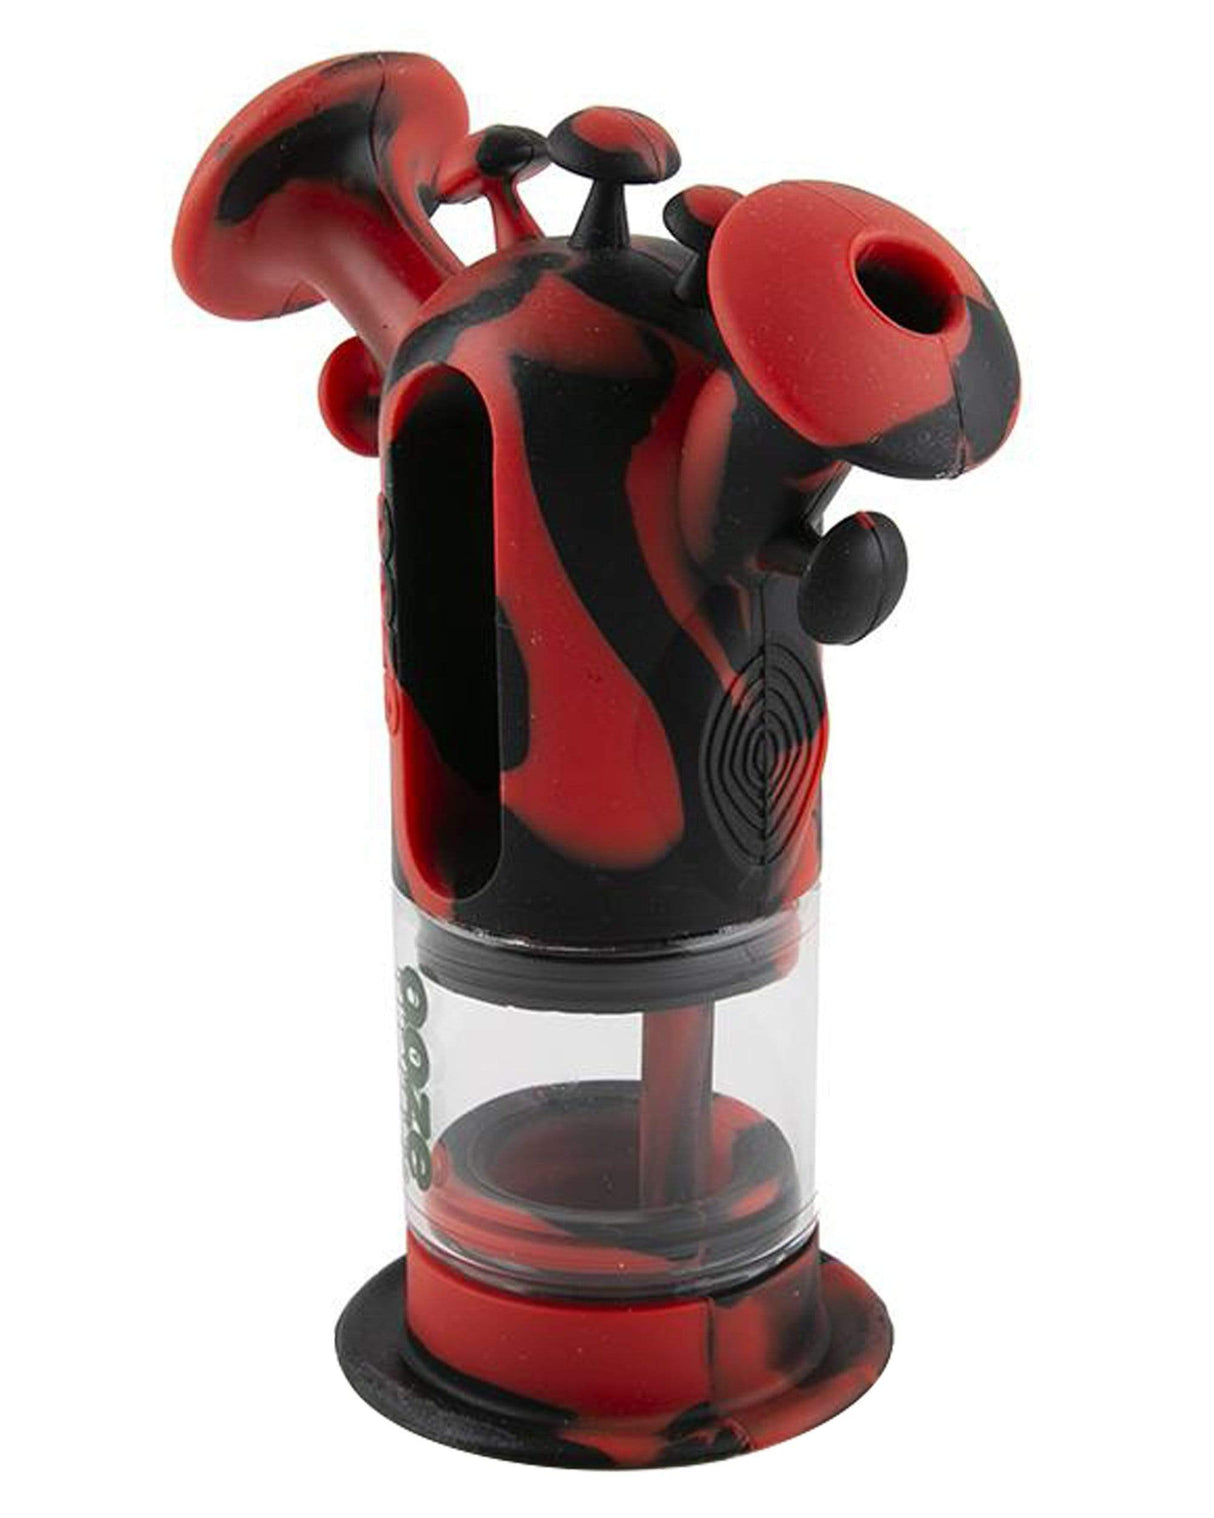 Ooze - Trip Silicone Bubbler in Rasta colors, 45-degree joint, front view on white background